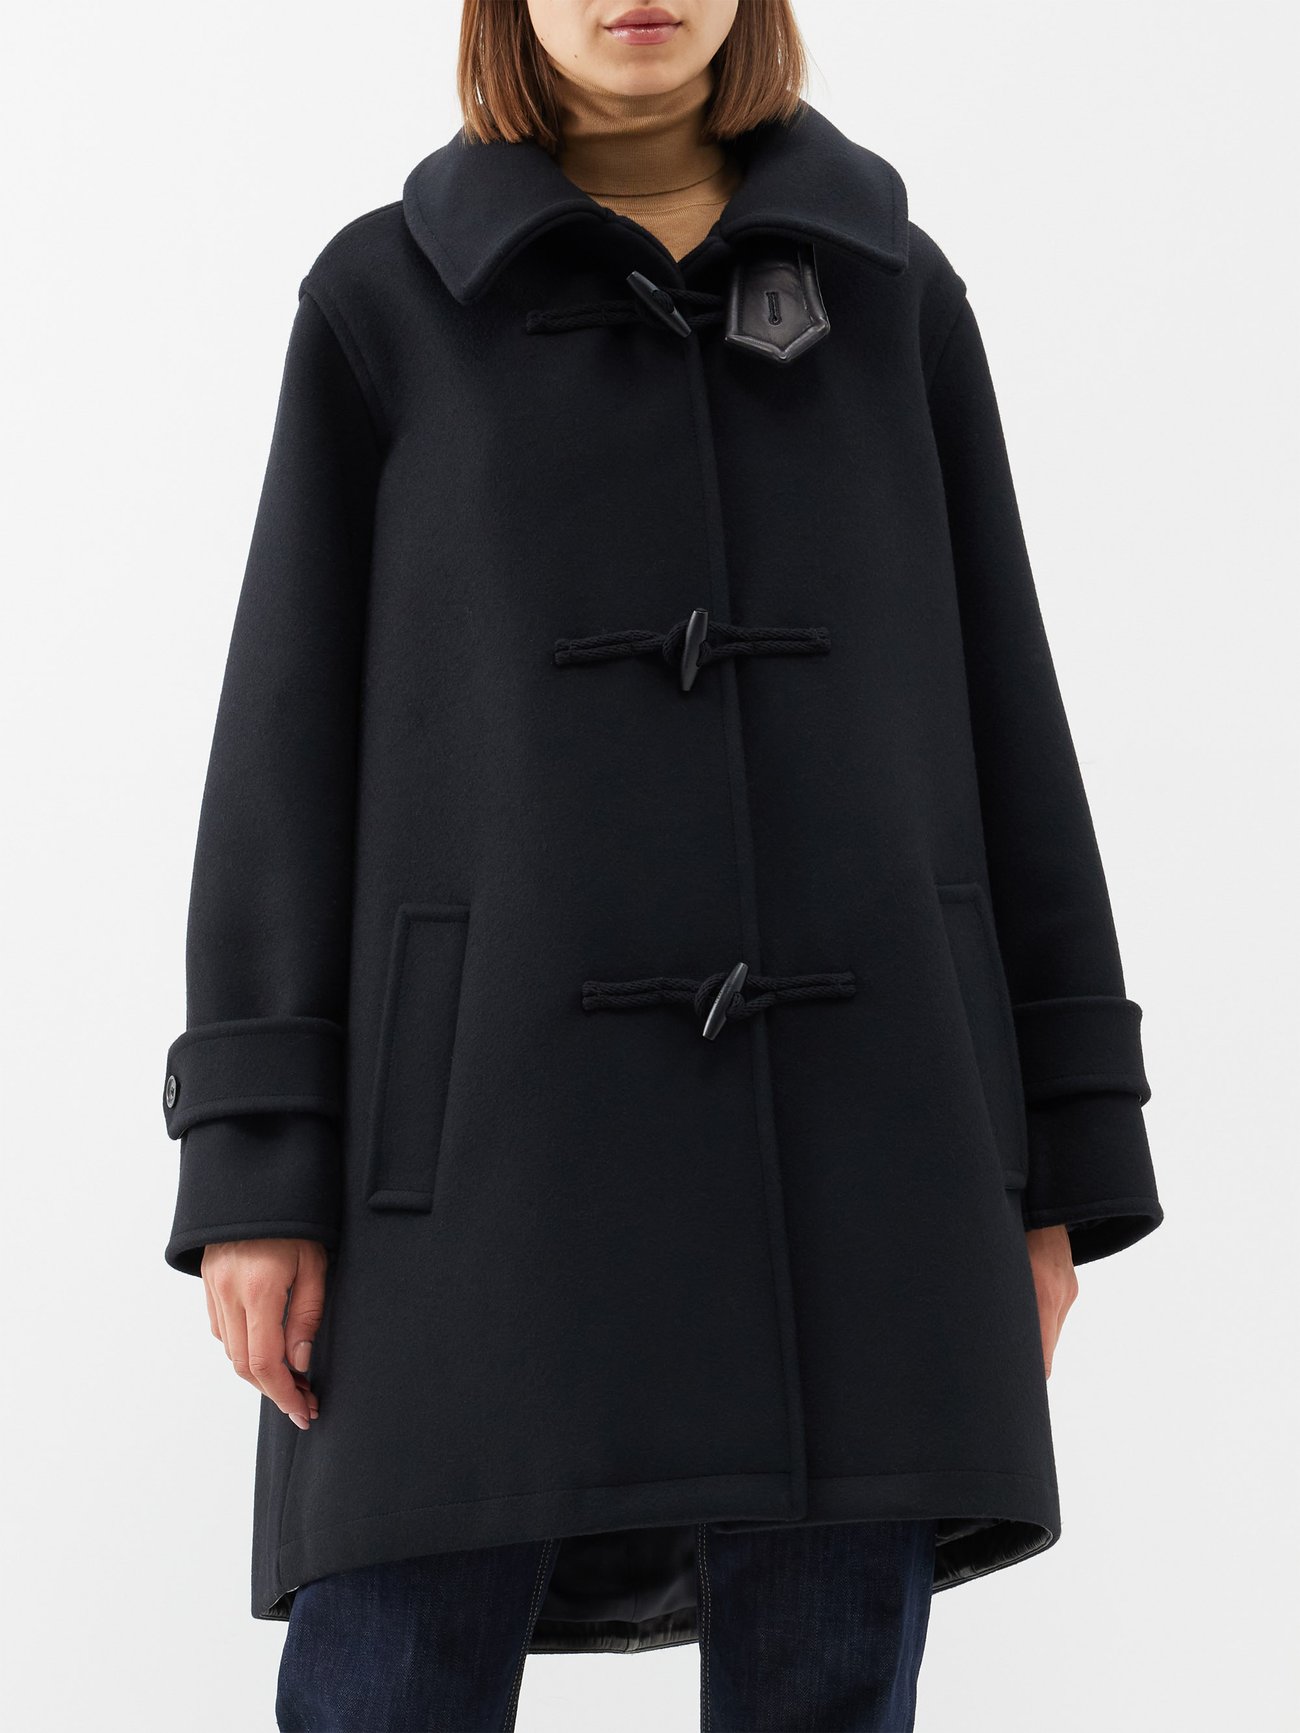 Trending Winter Coats 2023 2024 - Saint Laurent's black duffle coat is crafted from a durable wool and reworks the silhouette with a contemporary exaggerated collar and large toggles.
